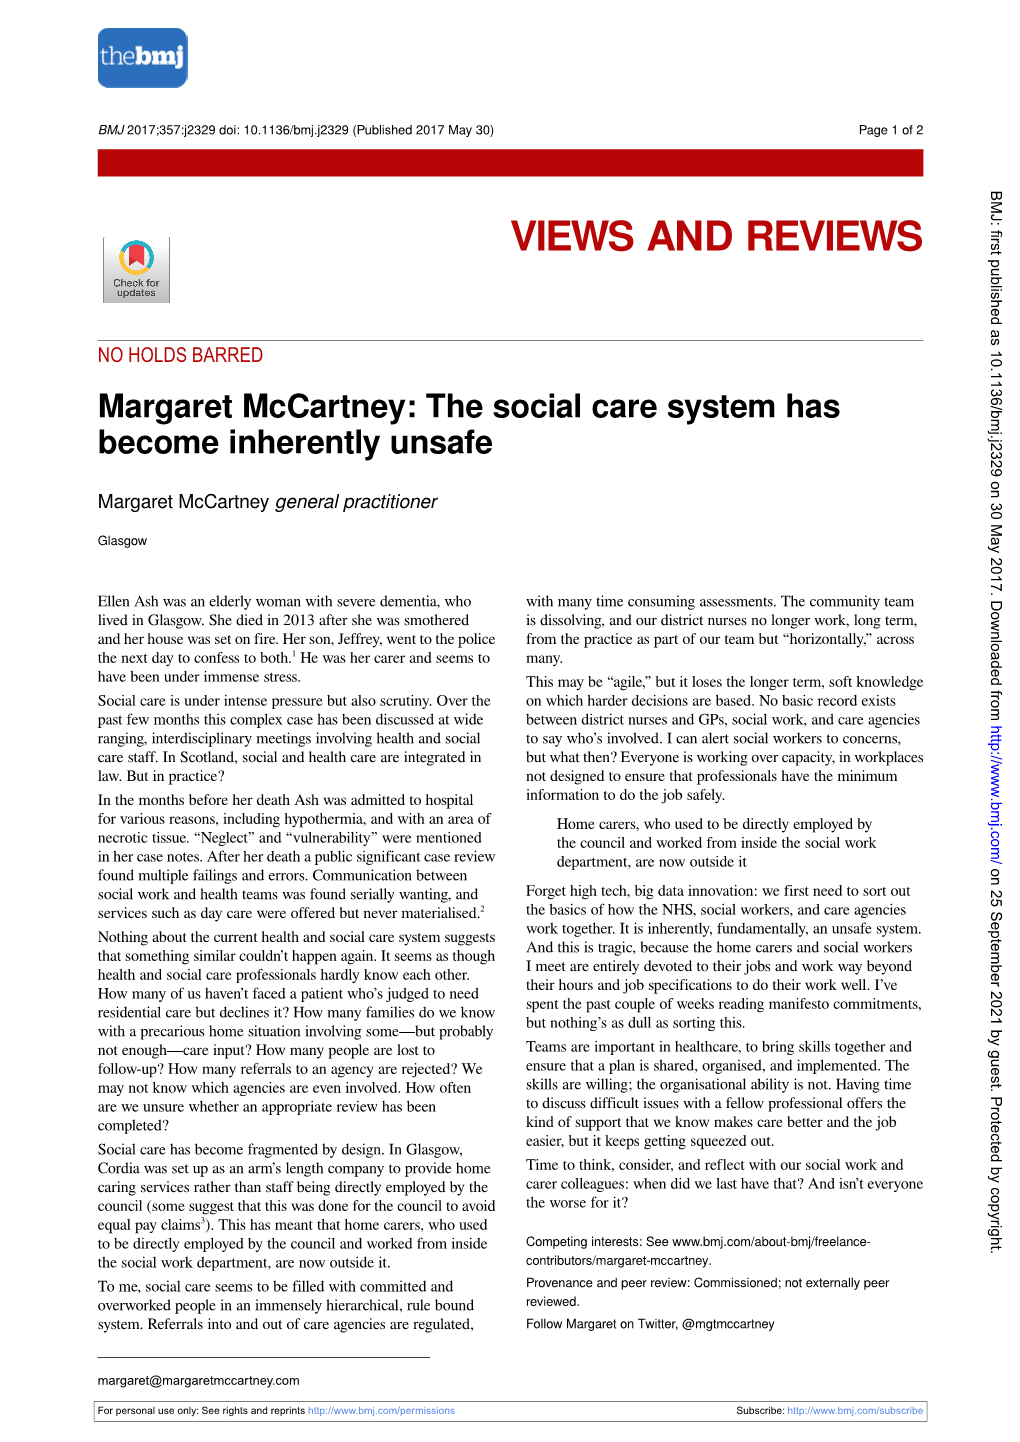 Margaret Mccartney: the Social Care System Has Become Inherently Unsafe